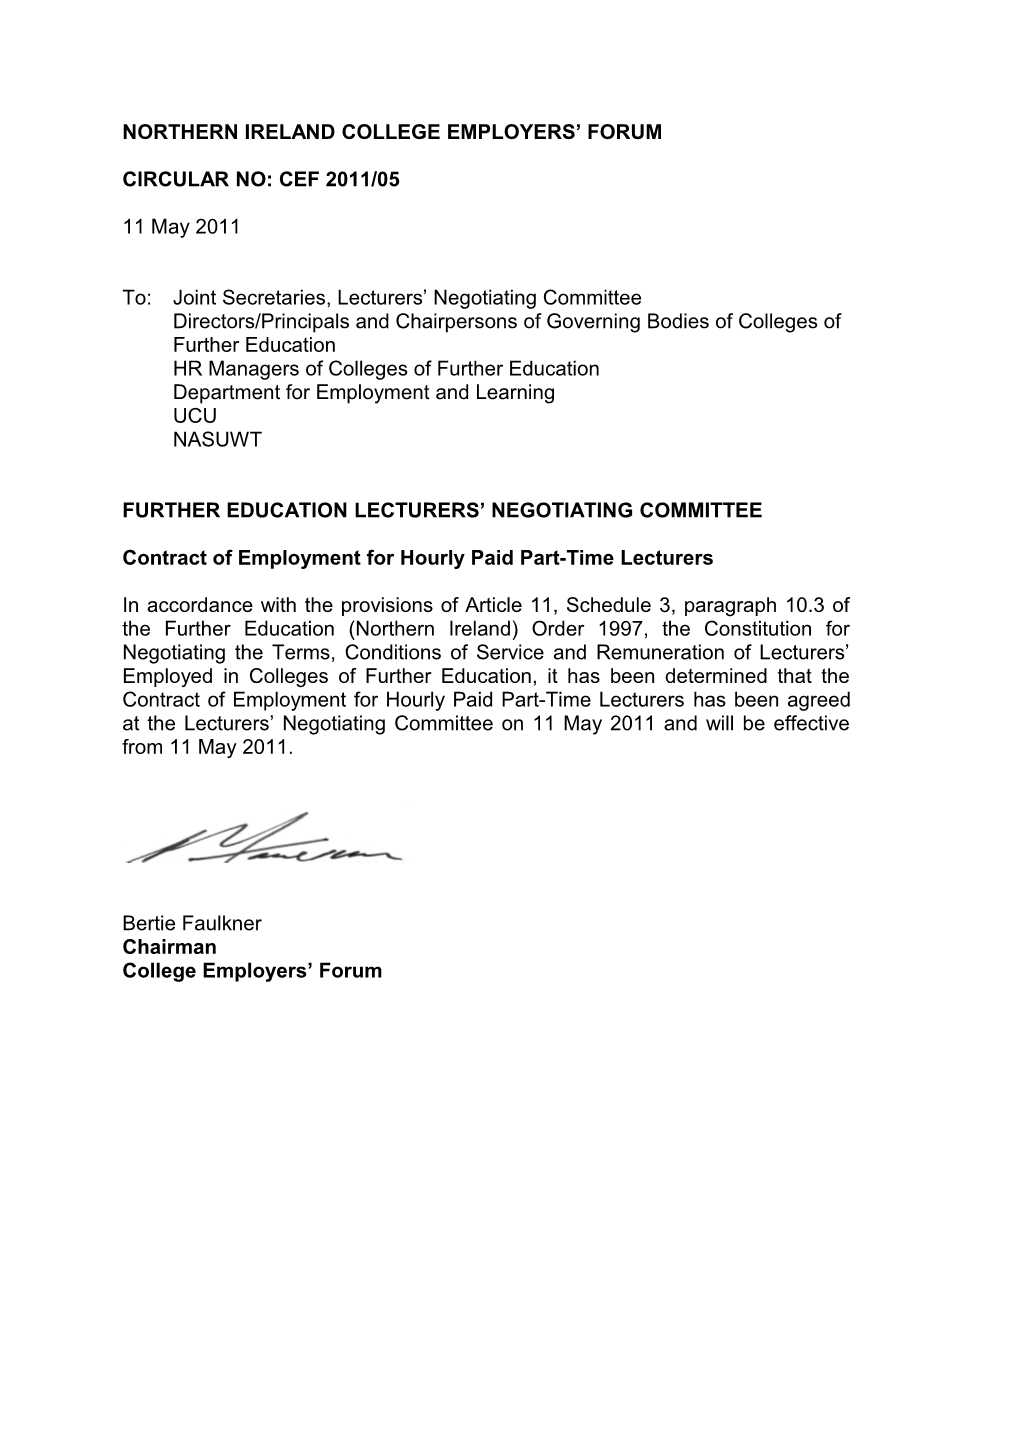 Contract of Employment for Hourly Paid Part-Time Lecturers